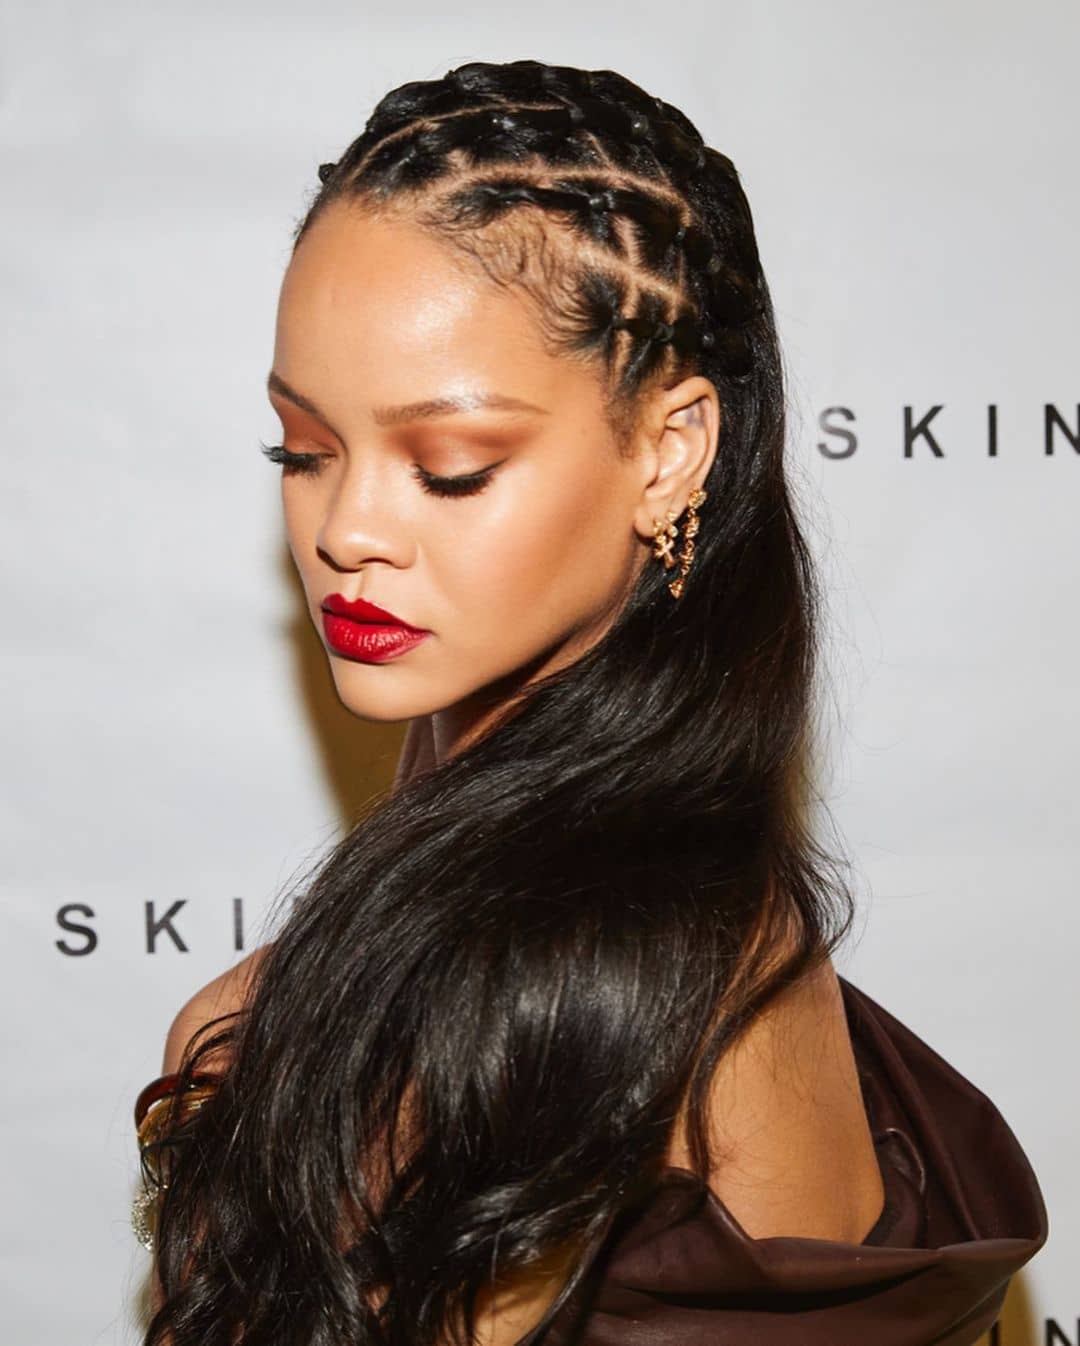 Rihanna - Biography, Profile, Facts and Career